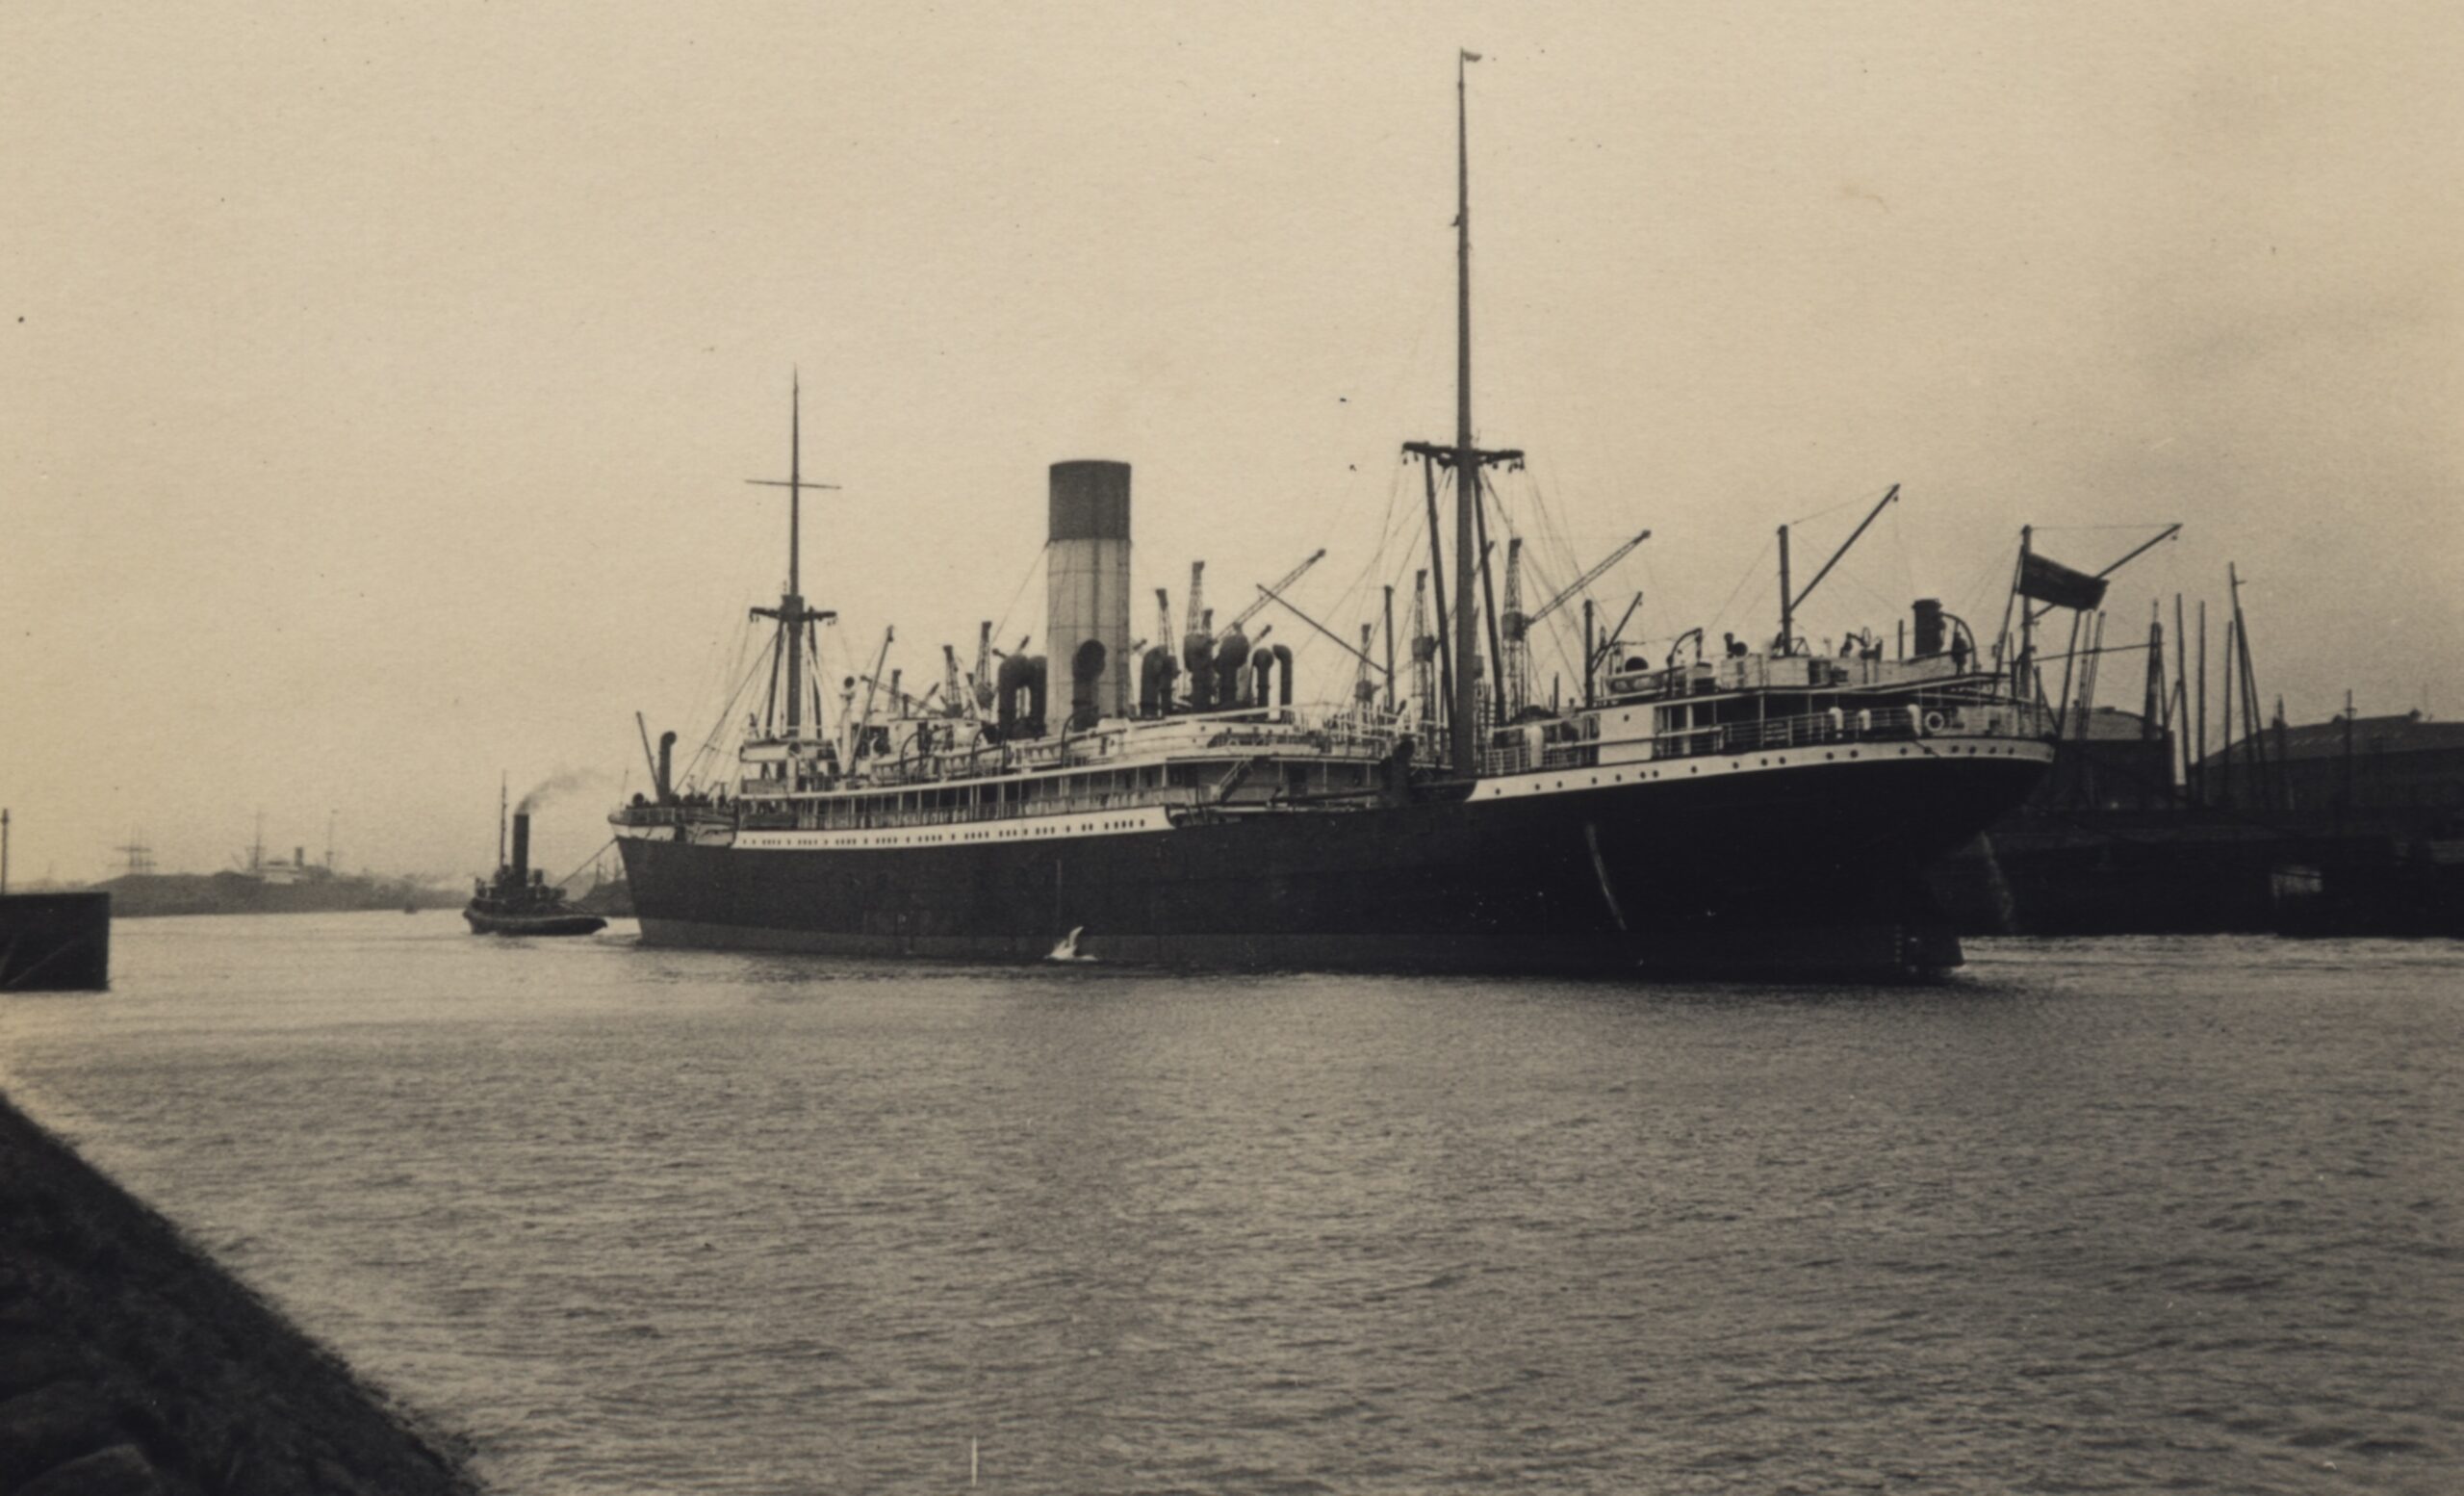 A balck and white archive photo showing a large ship at sea